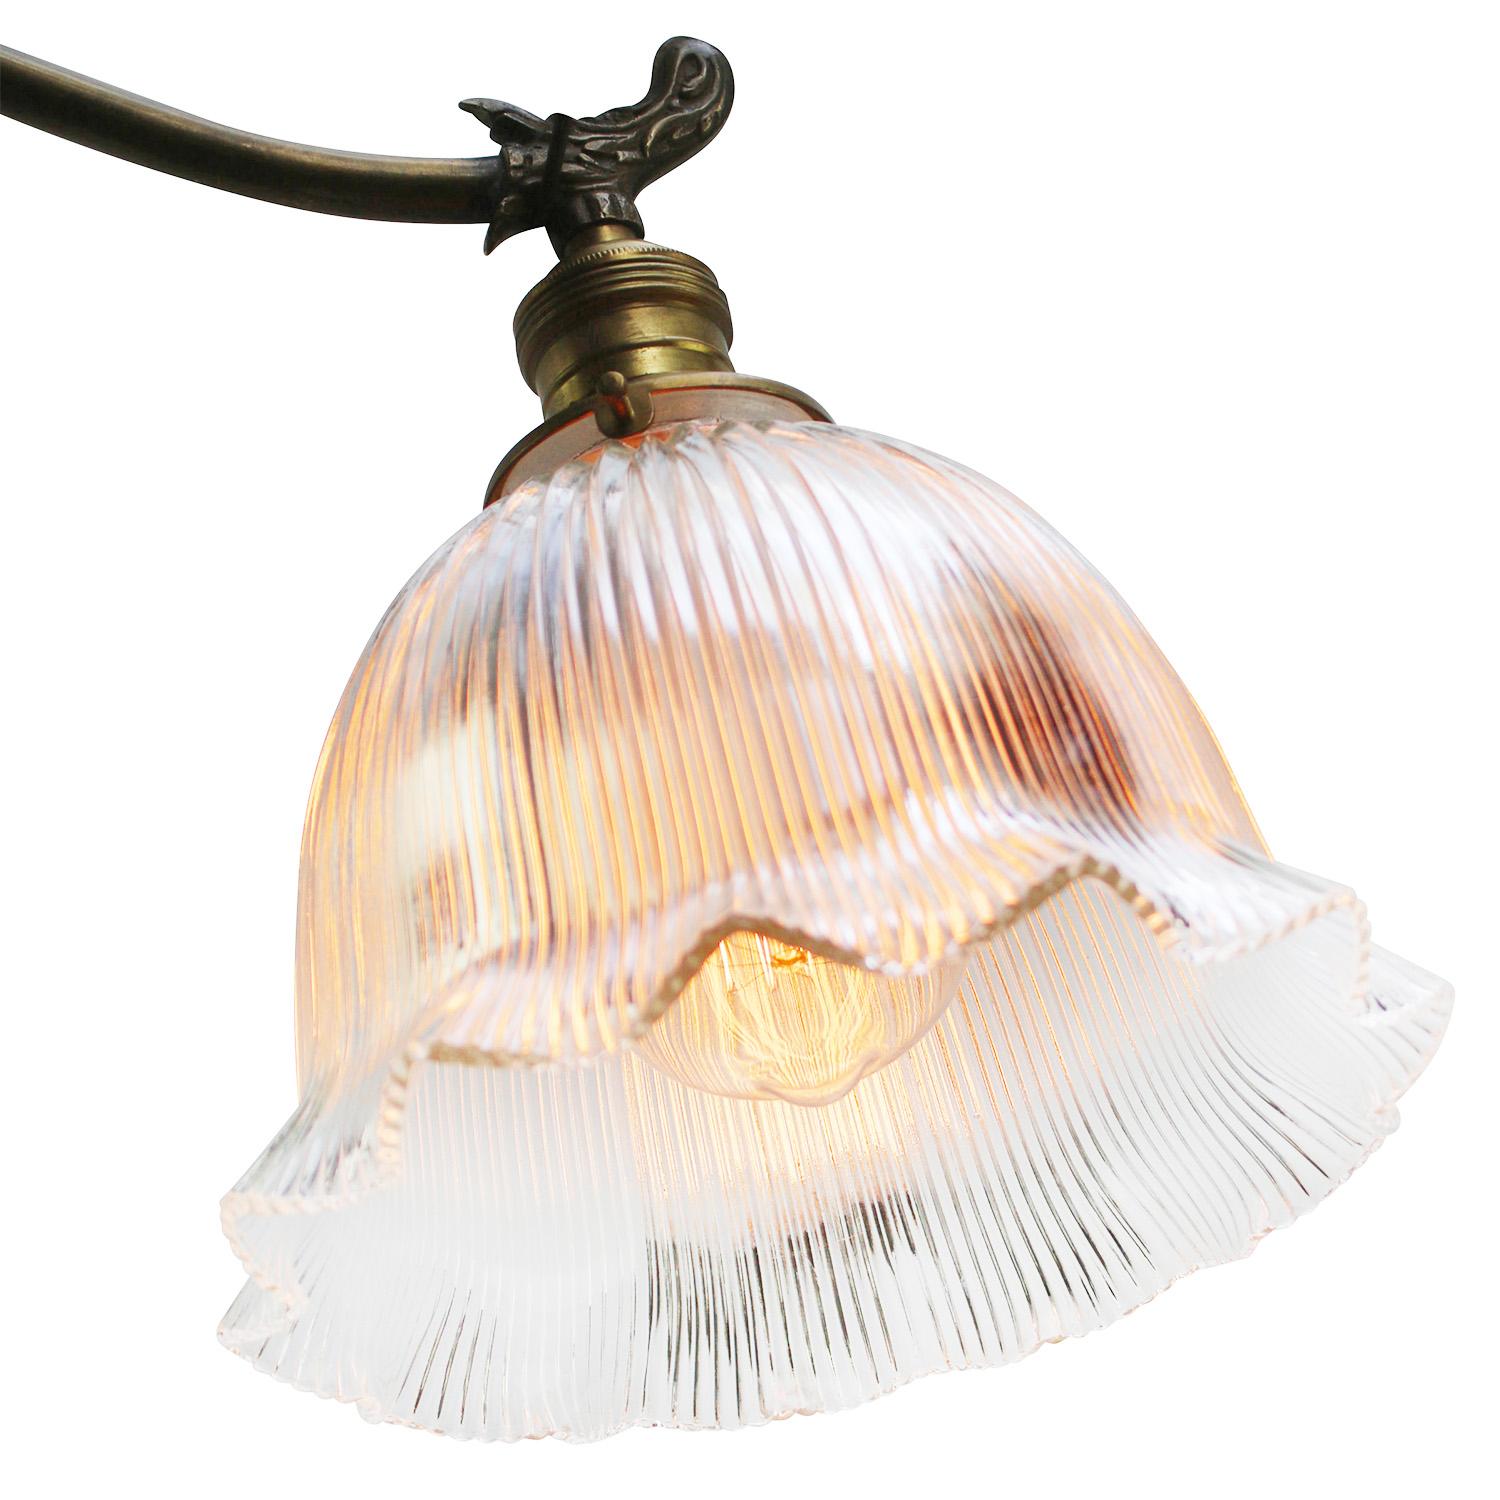 French wall lamp
Holophane clear glass shade
Brass wall piece and arm

diameter brass wall mount: 10 cm / 3.94”

Weight: 1.30 kg / 2.9 lb

Priced per individual item. All lamps have been made suitable by international standards for incandescent